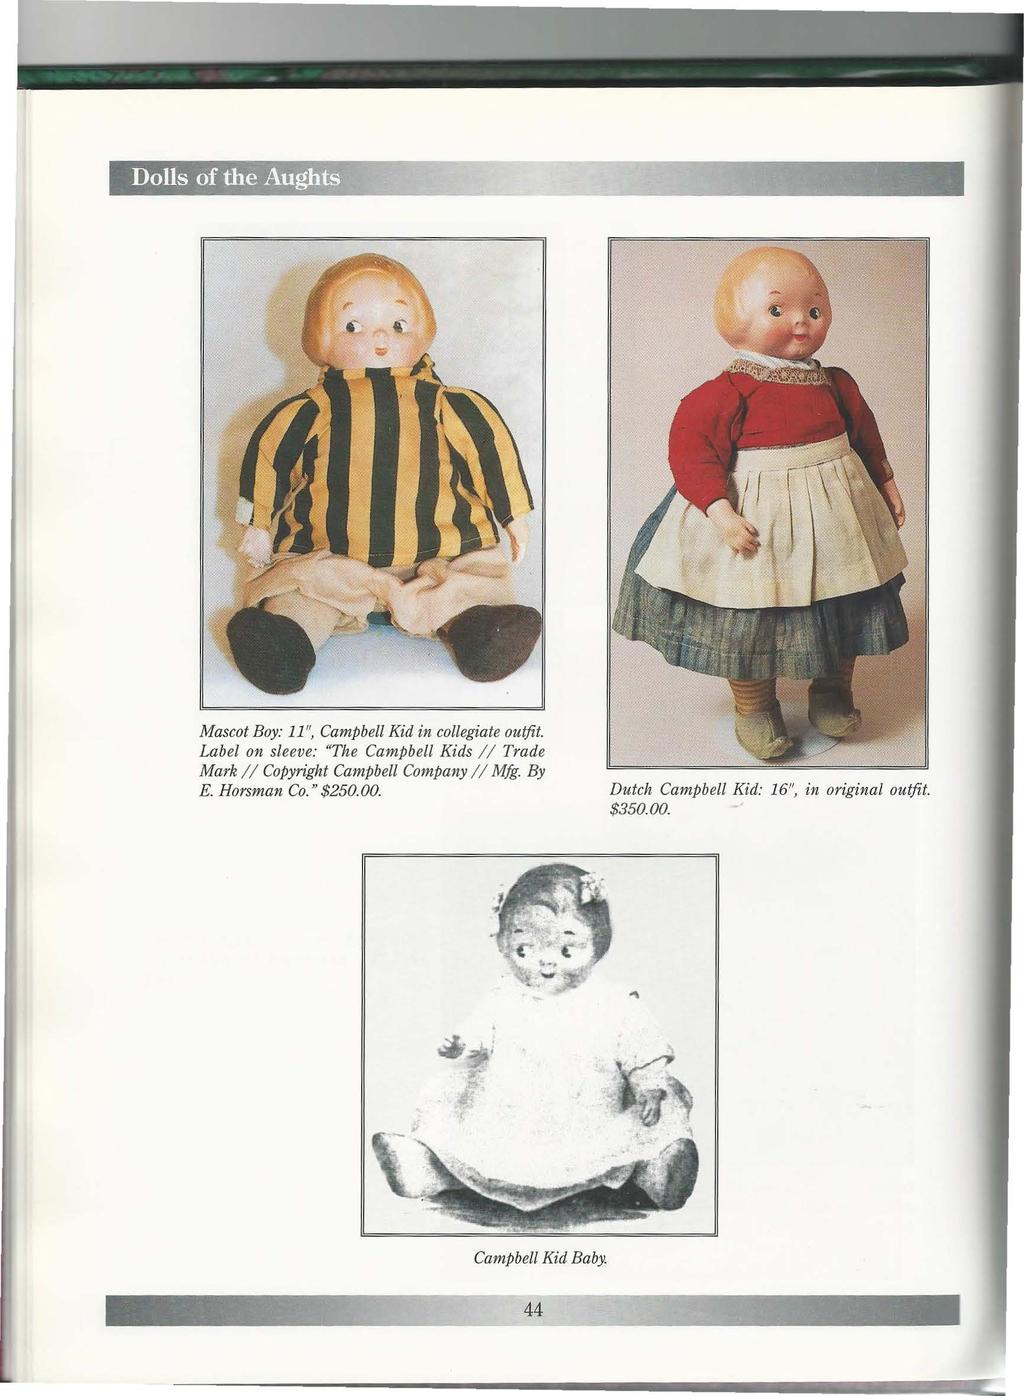 ' Dolls -of the Au@tS.;r-'.. 'l;o"',_;}jj f... ~~ x~ Mascot Boy: 11", Campbell Kid in collegiate outfit.